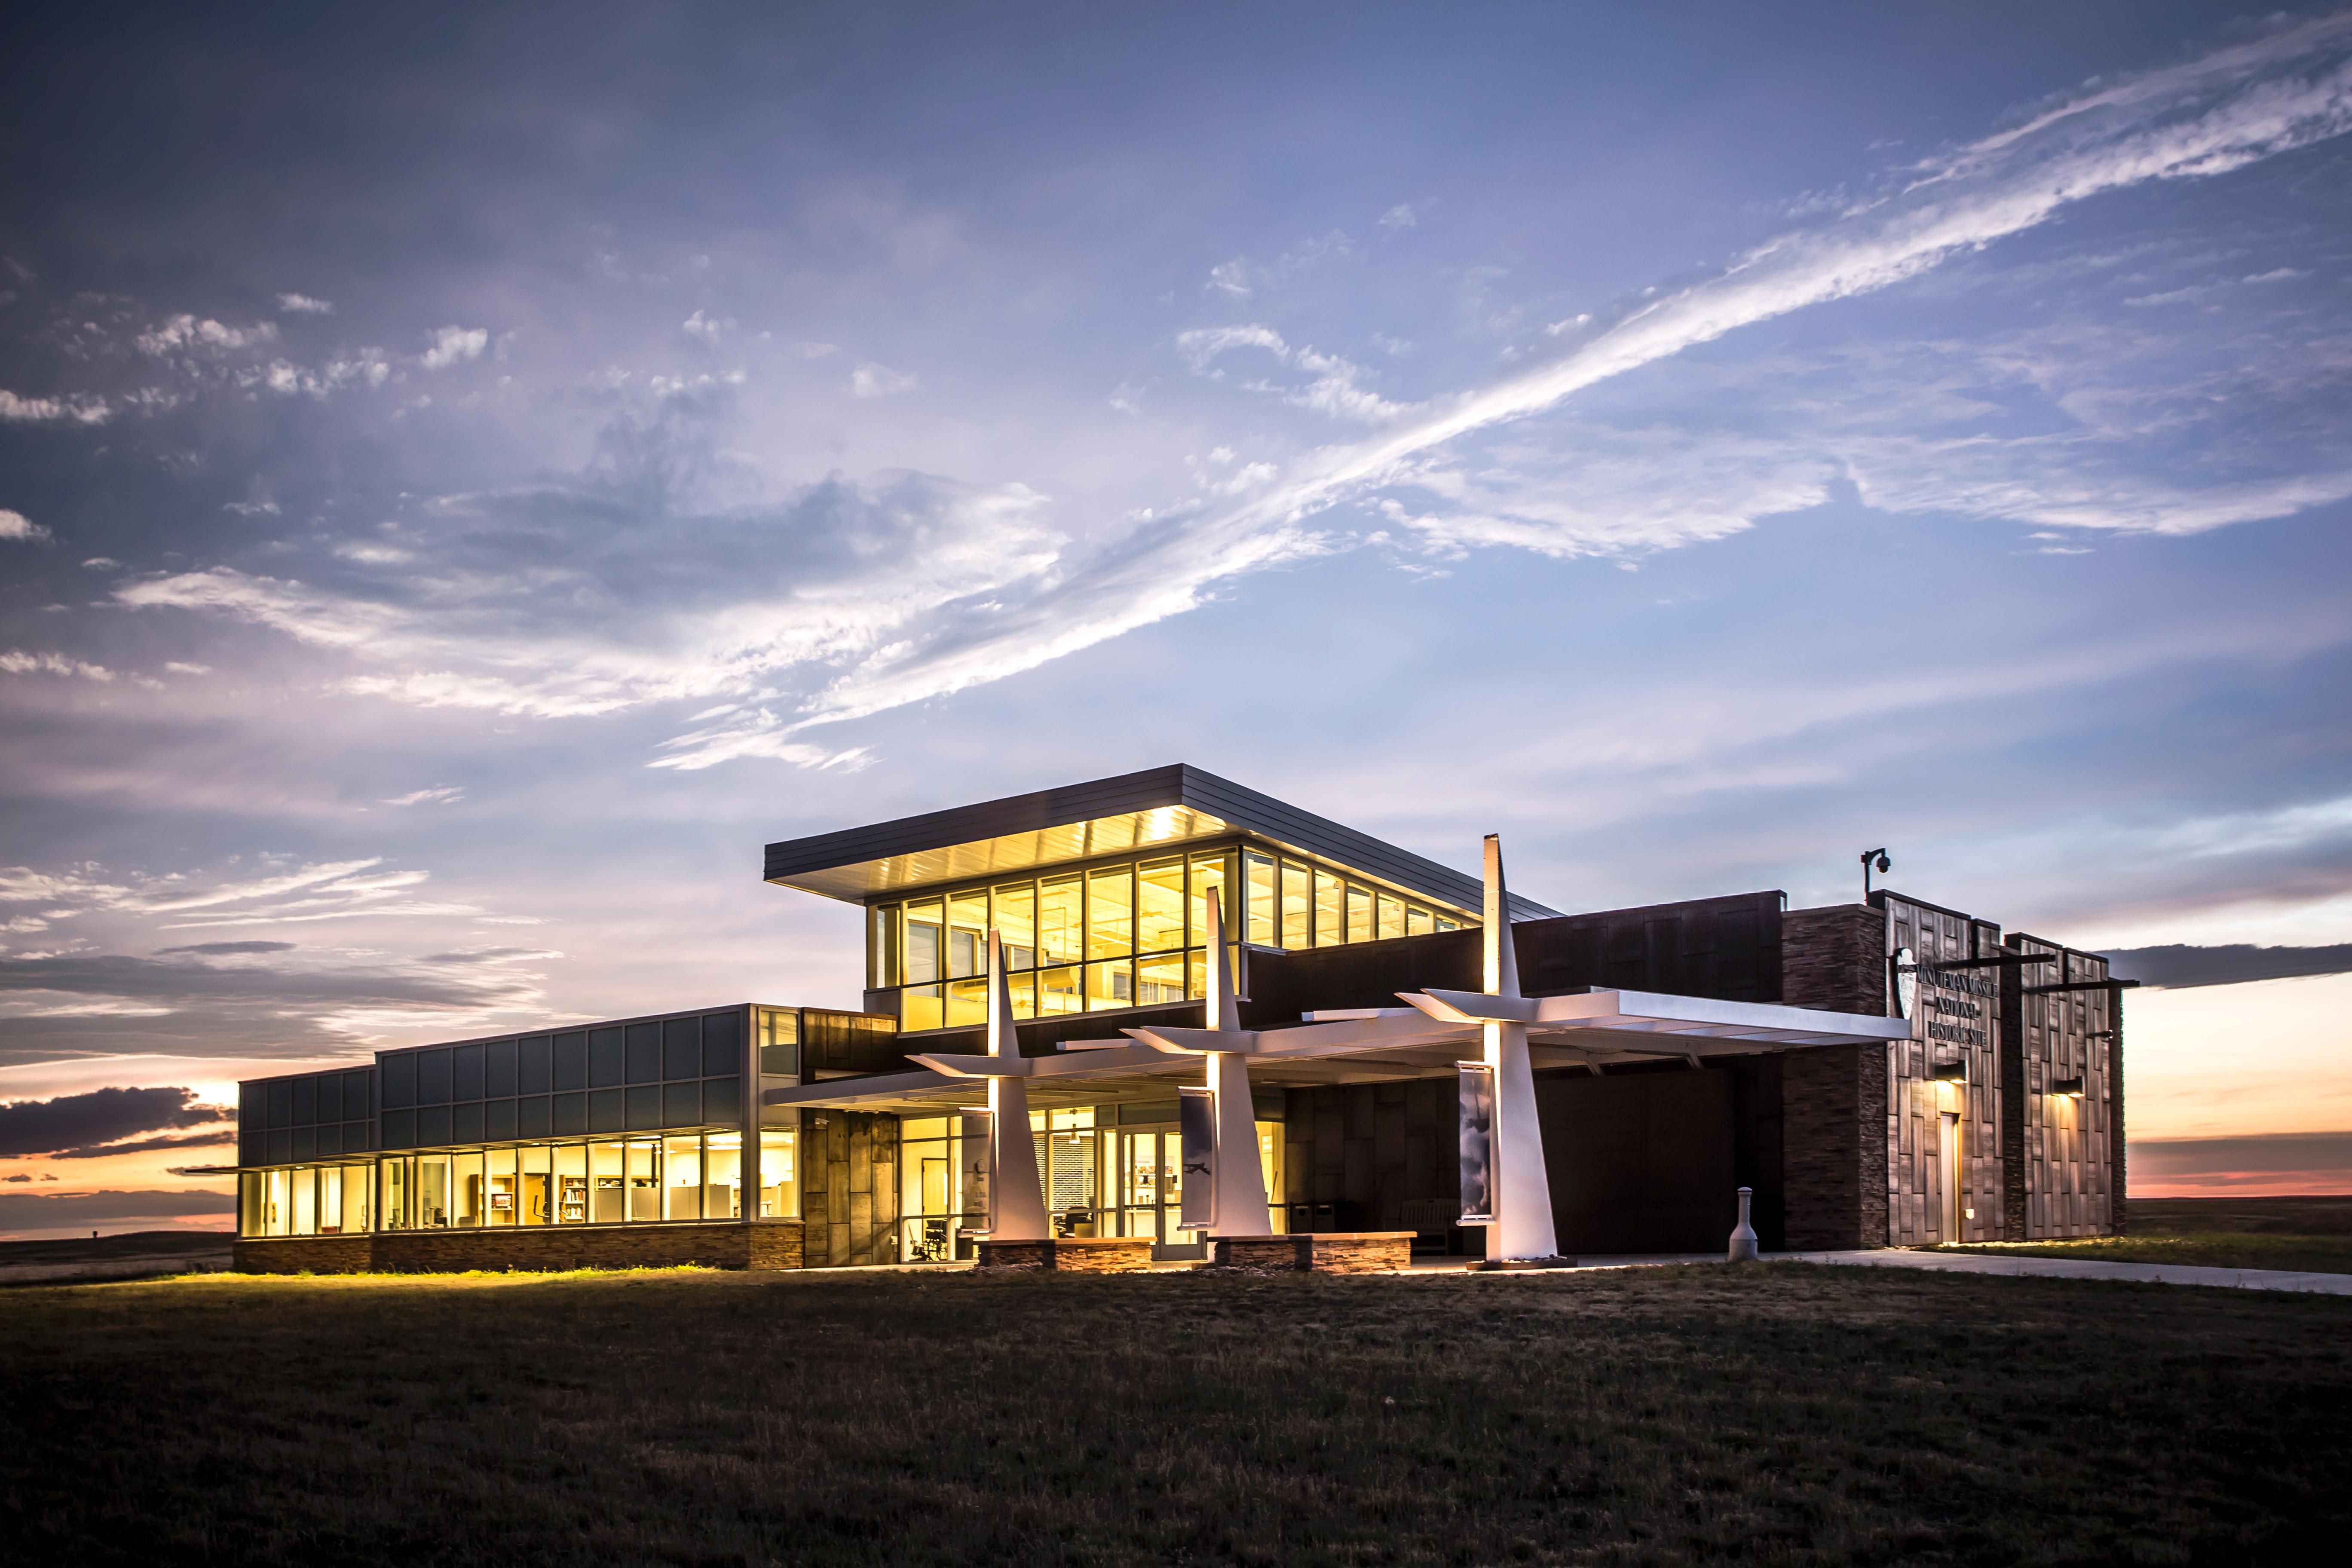 A modern building with a prominent glass clerestory dominates a prairie landscape at sunset